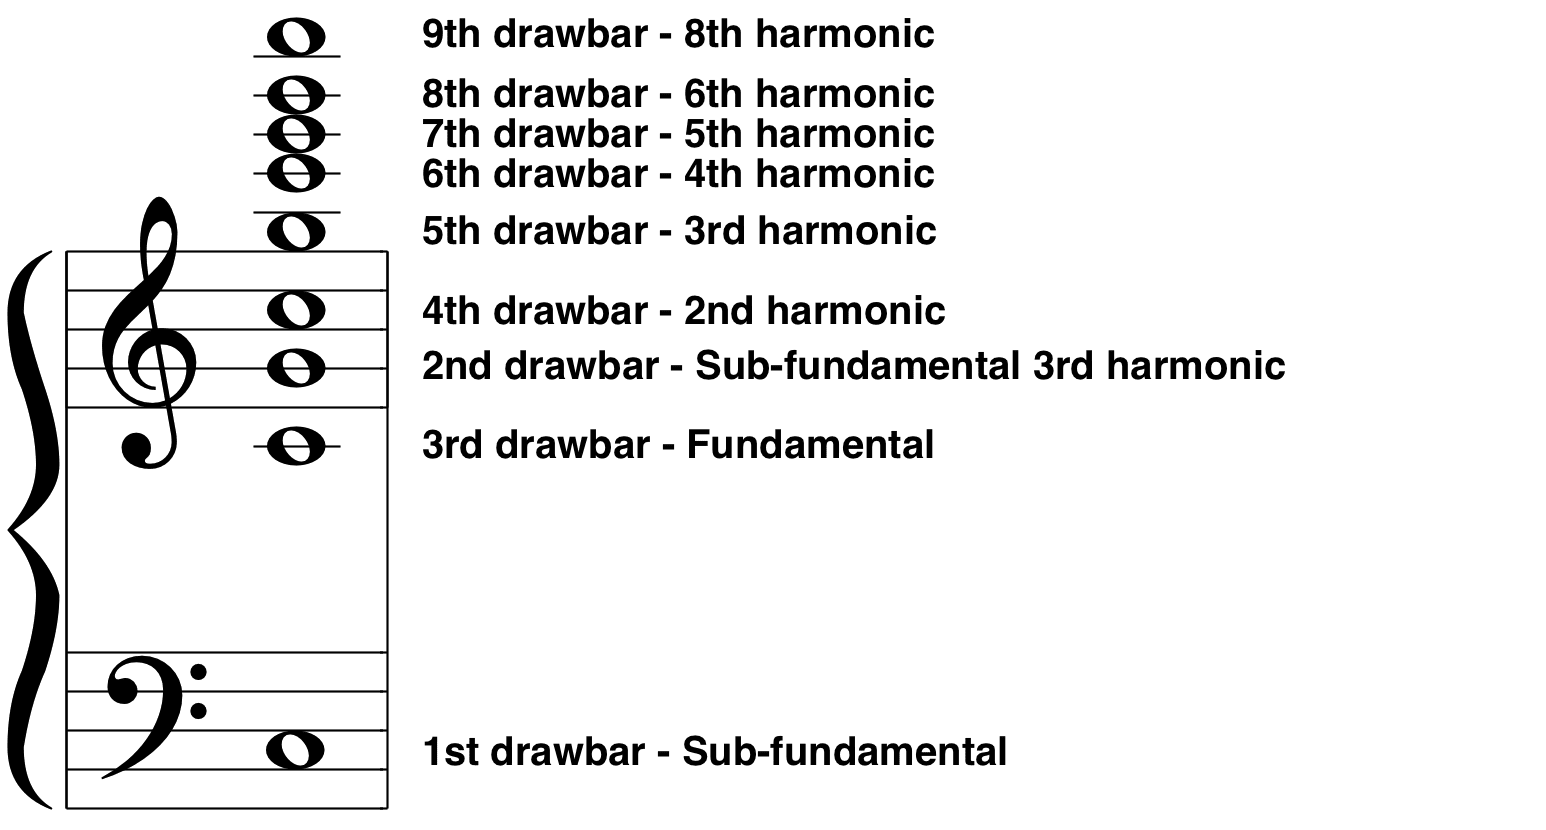 The drawbars in relation to the harmonic series